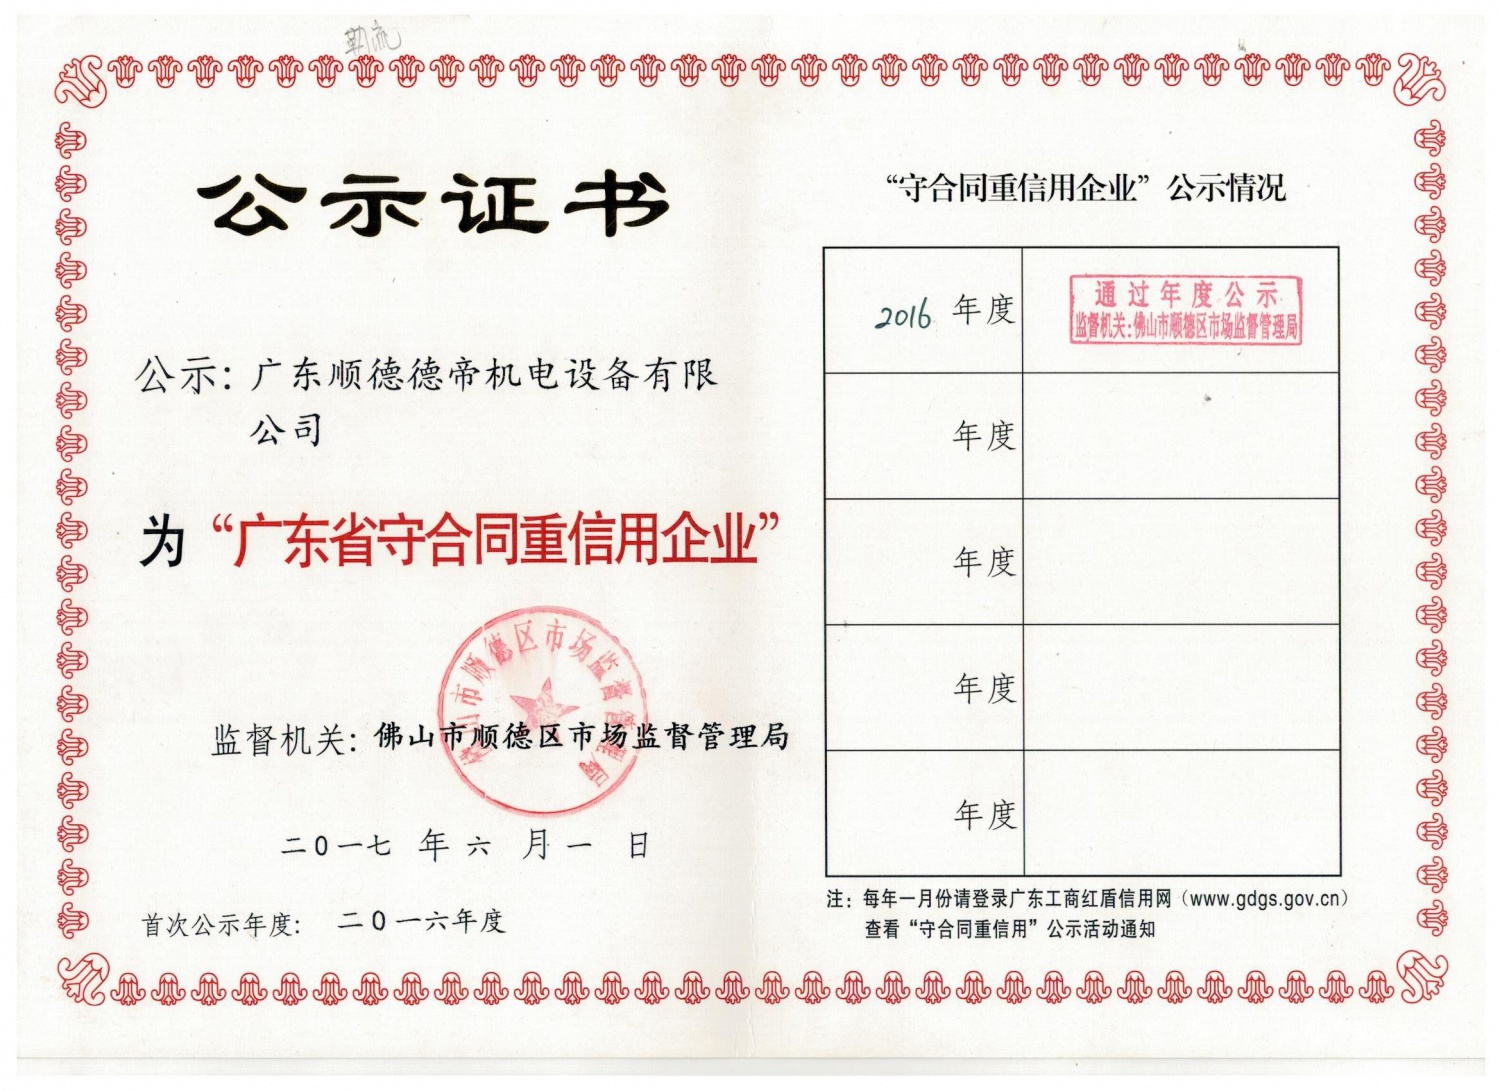 2016 Guangdong Province Contract Adhering and Credit Valuing Enterprise Publicity Certificate